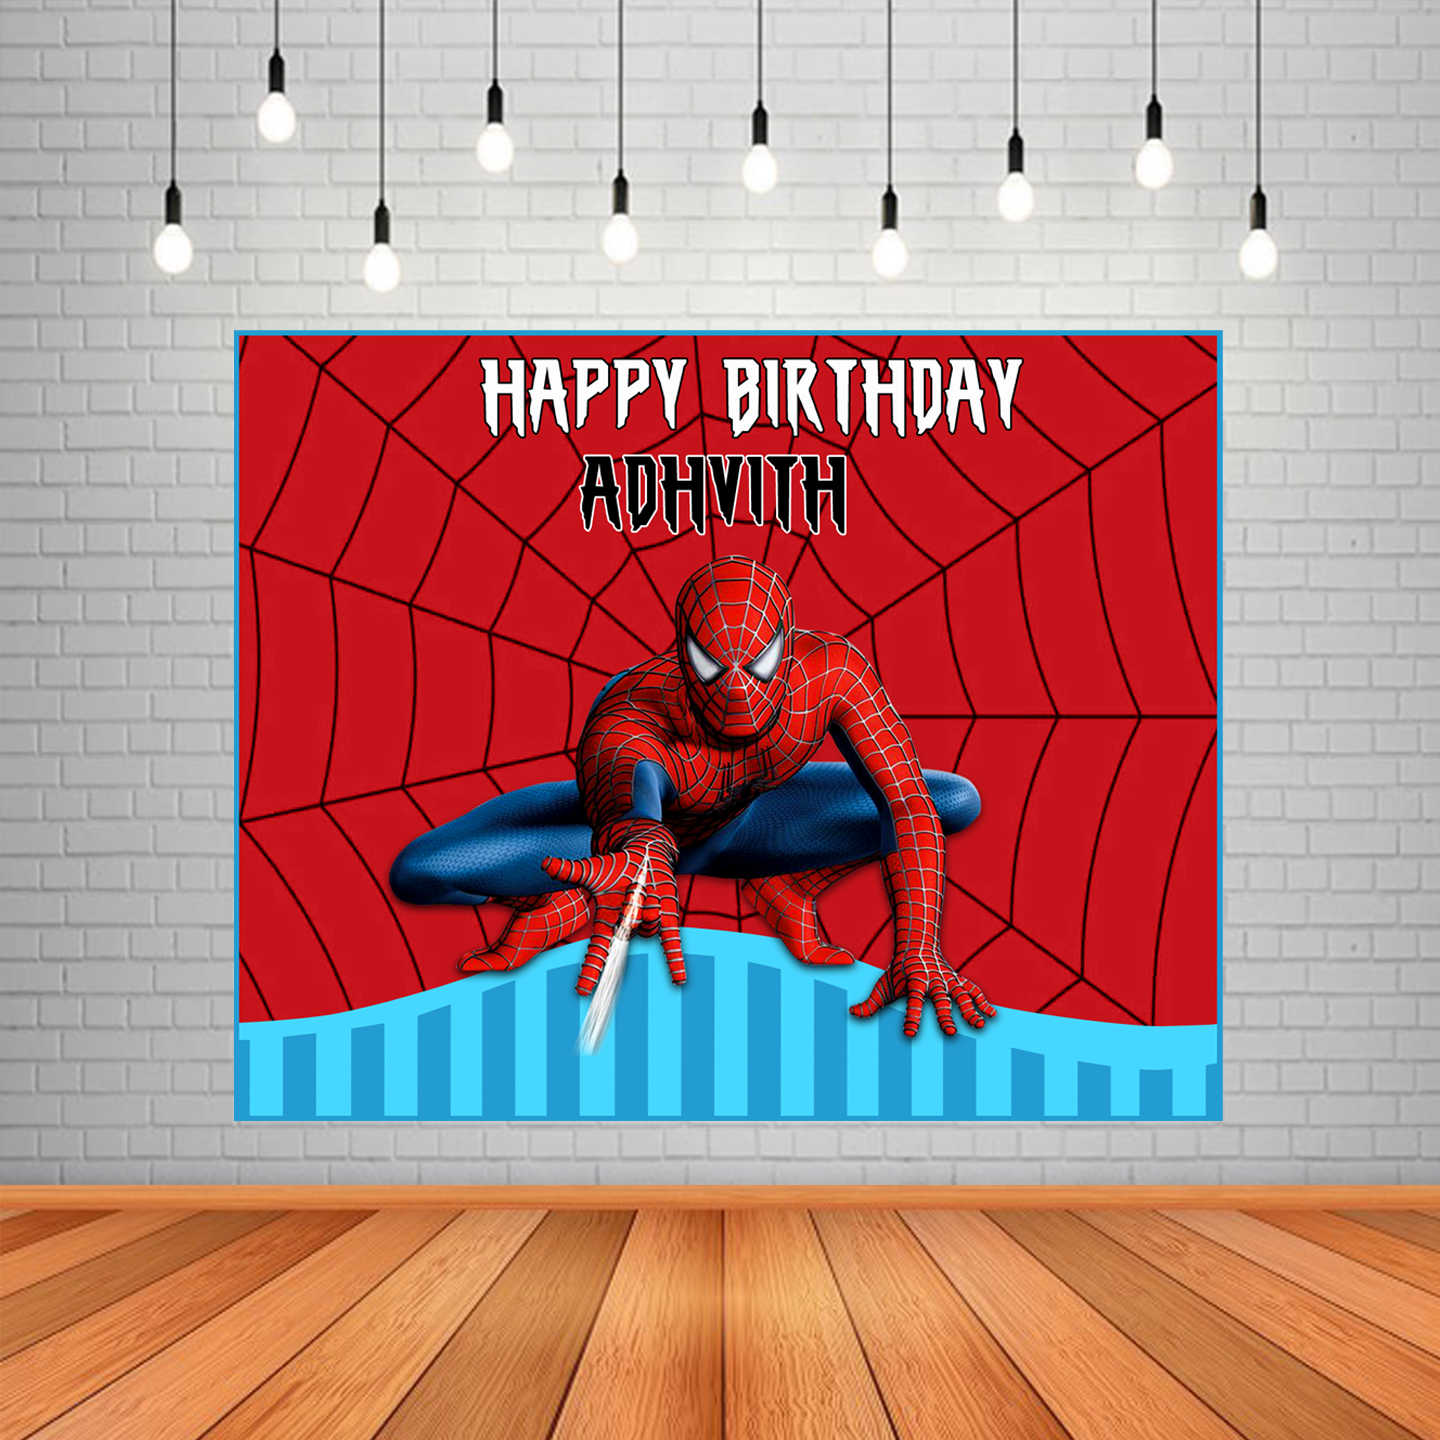 Personalized Spiderman Birthday Backdrop / Background Banner #2 (4ft x 5ft)